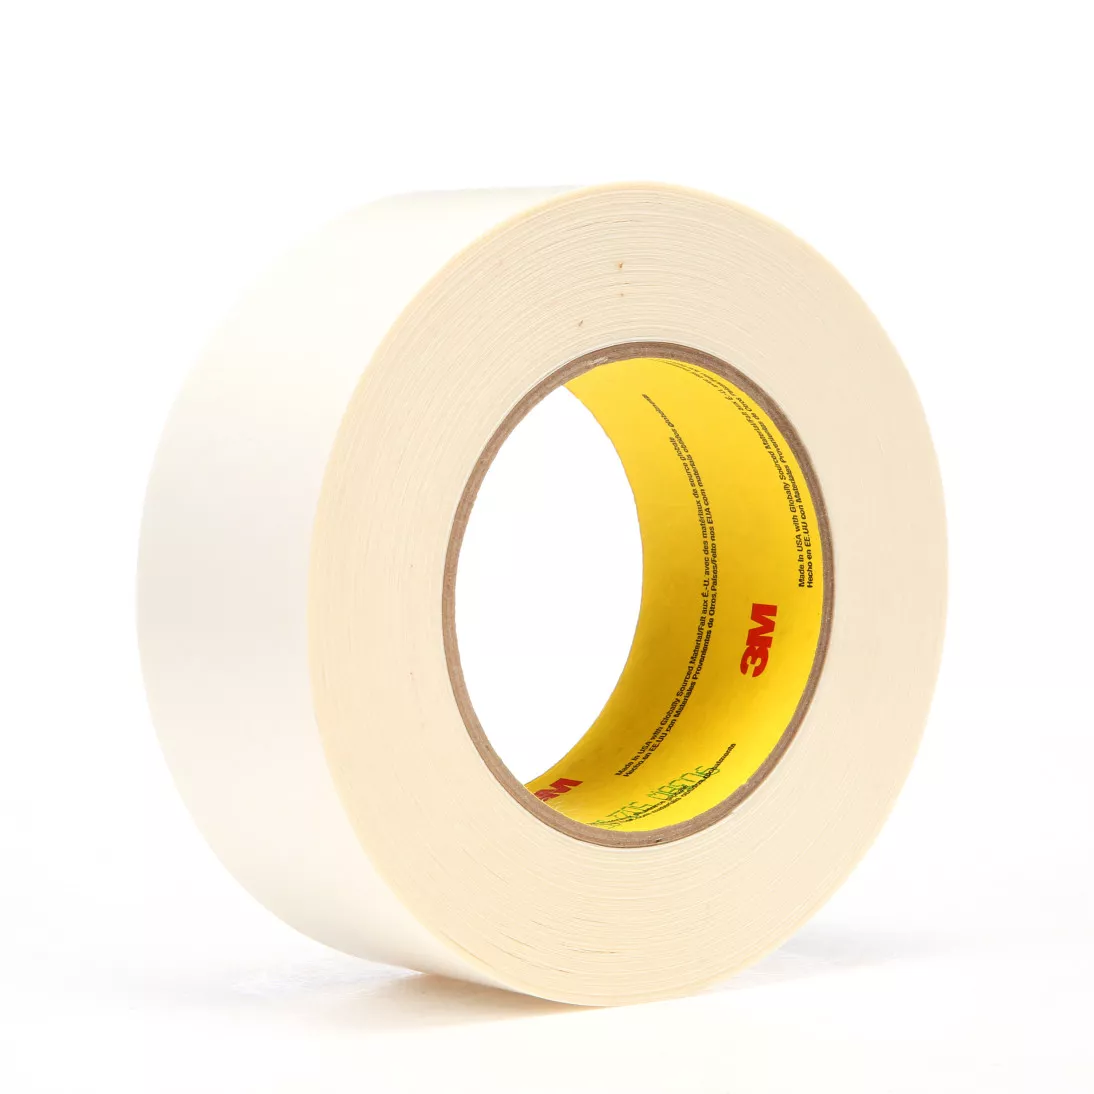 3M™ Repulpable Double Coated Splicing Tape 9038W, White, 24 mm x 33 m, 3
mil, 36 rolls per case